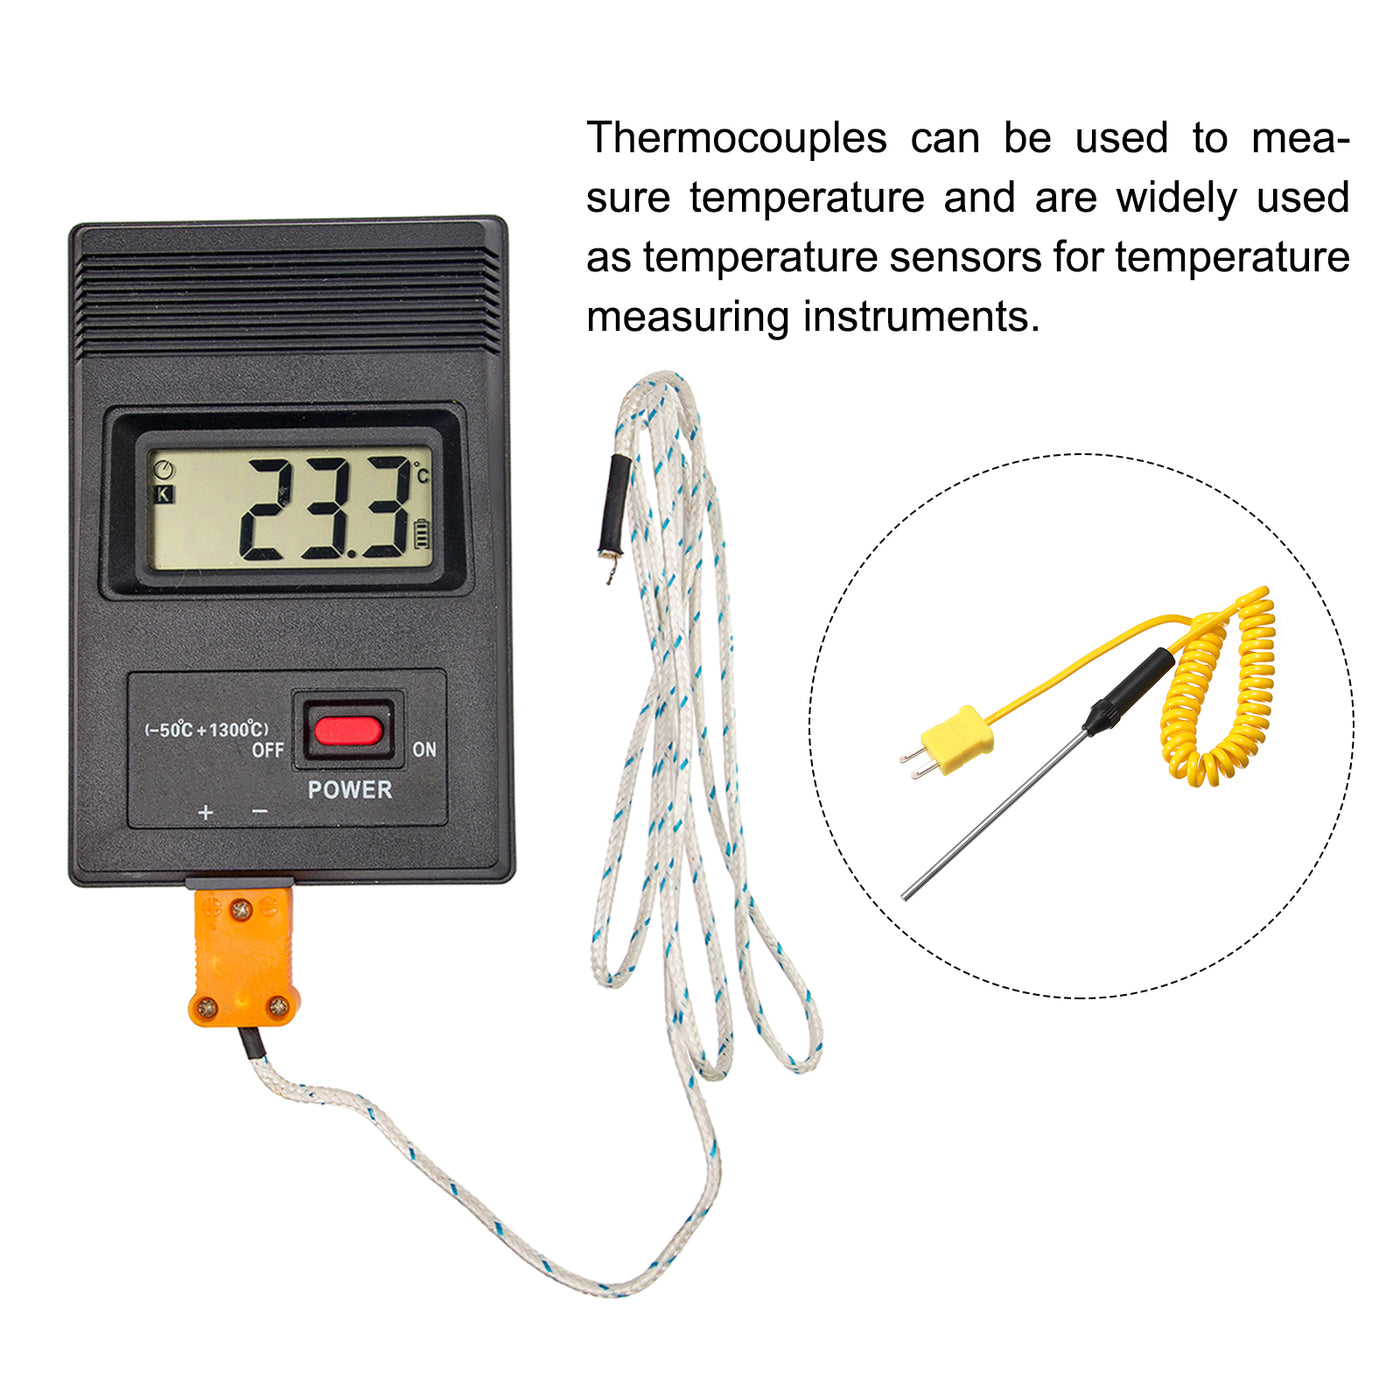 Harfington Surface Thermocouple 4“ Probe K Type Yellow Coiled Wire -50 to 650C